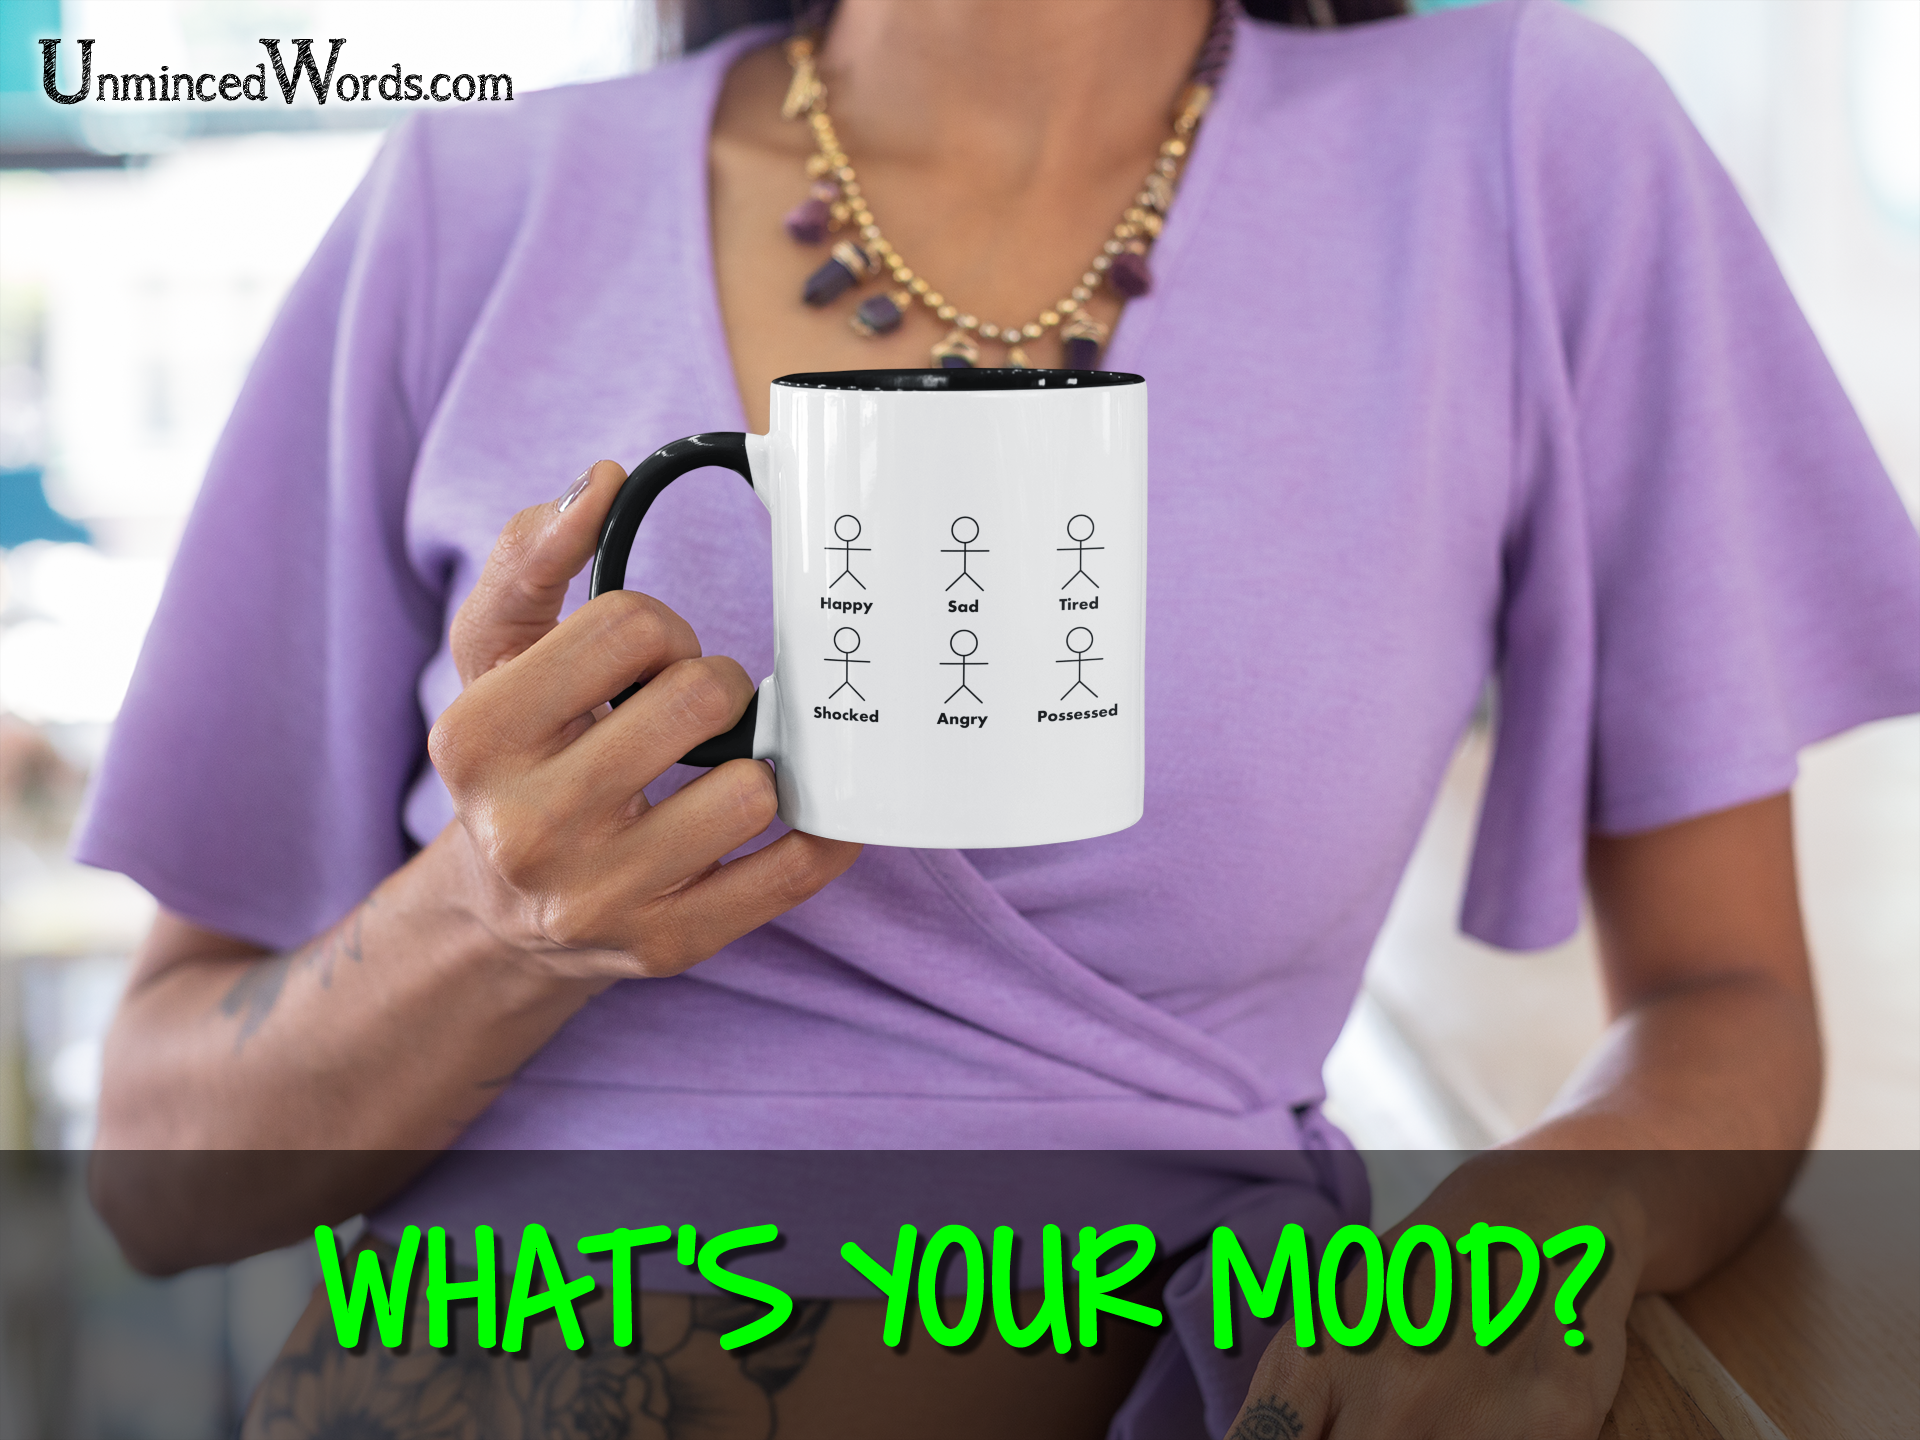 What's Your Morning Mood?